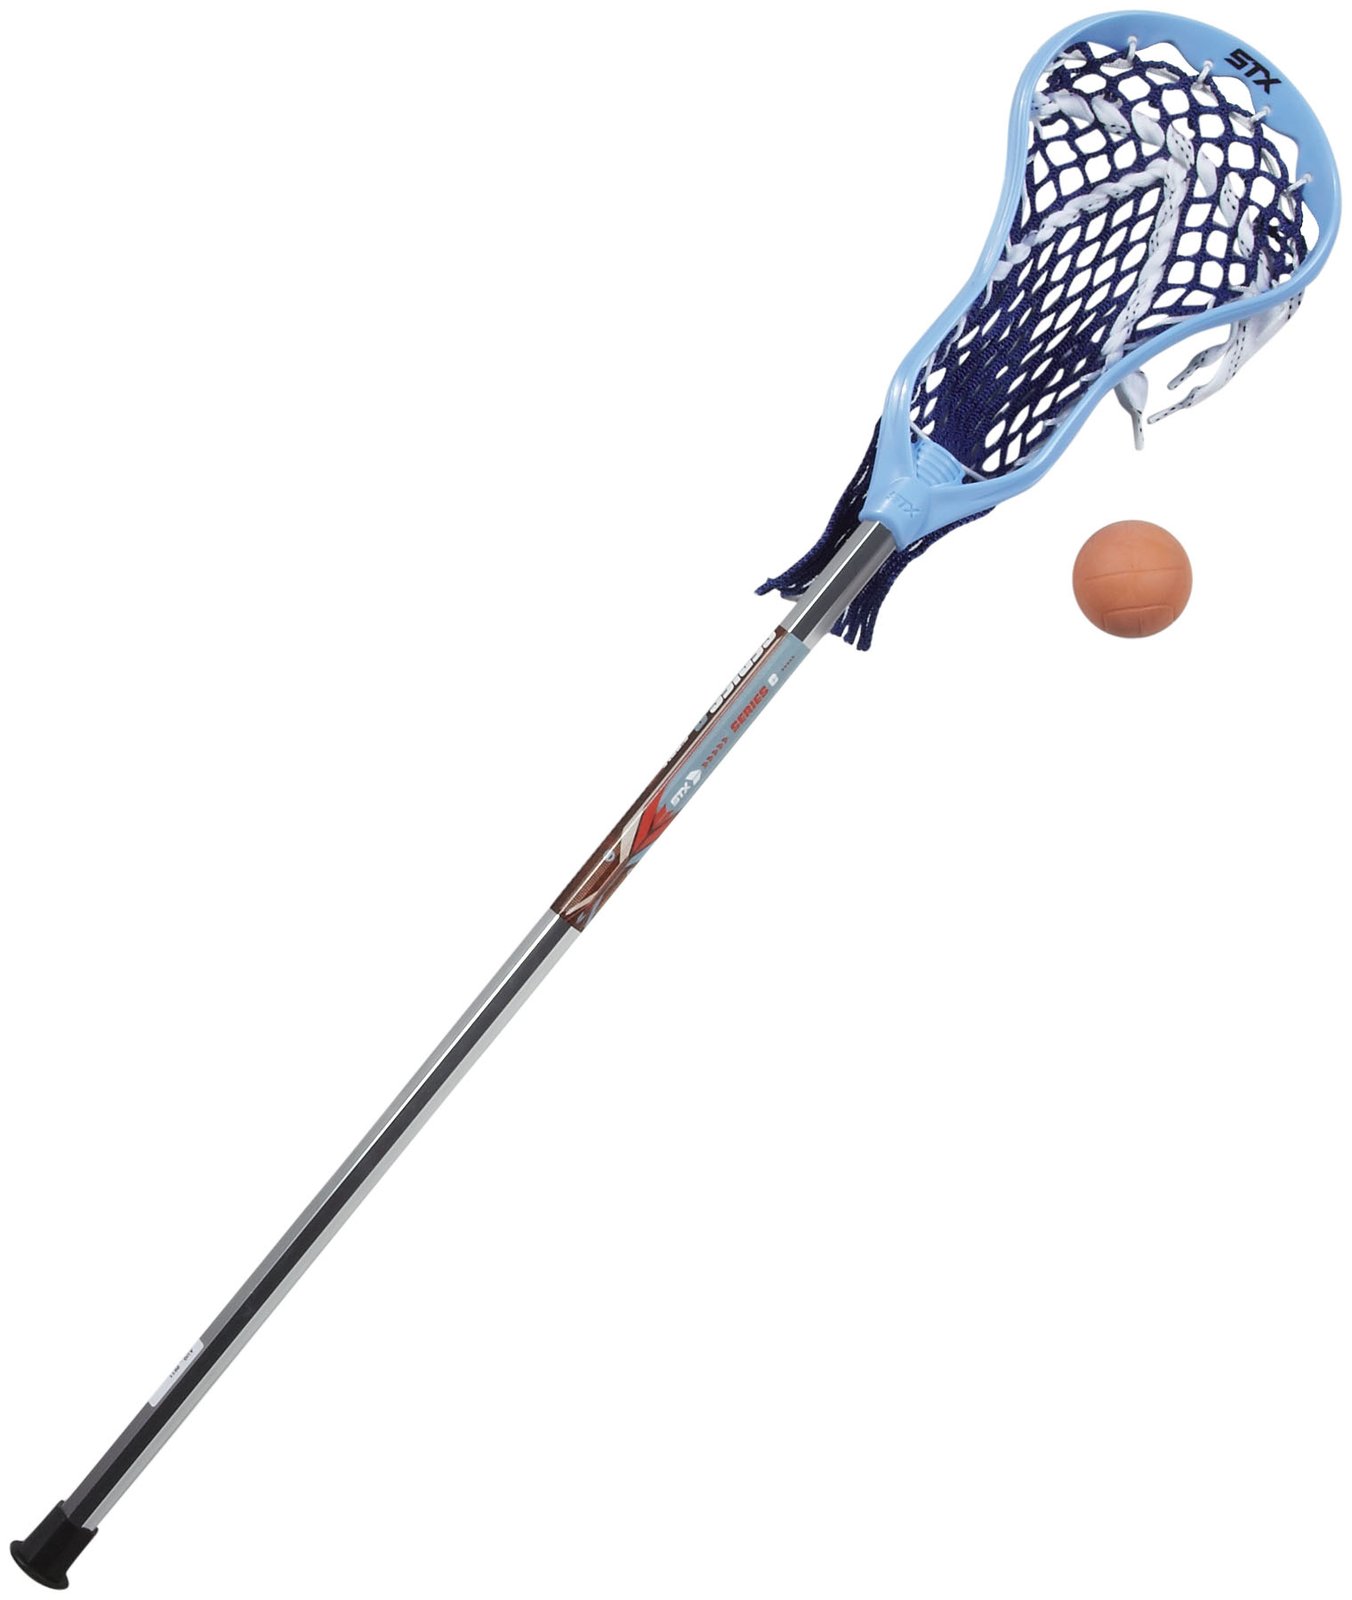 Lacrosse sticks with ball free image download